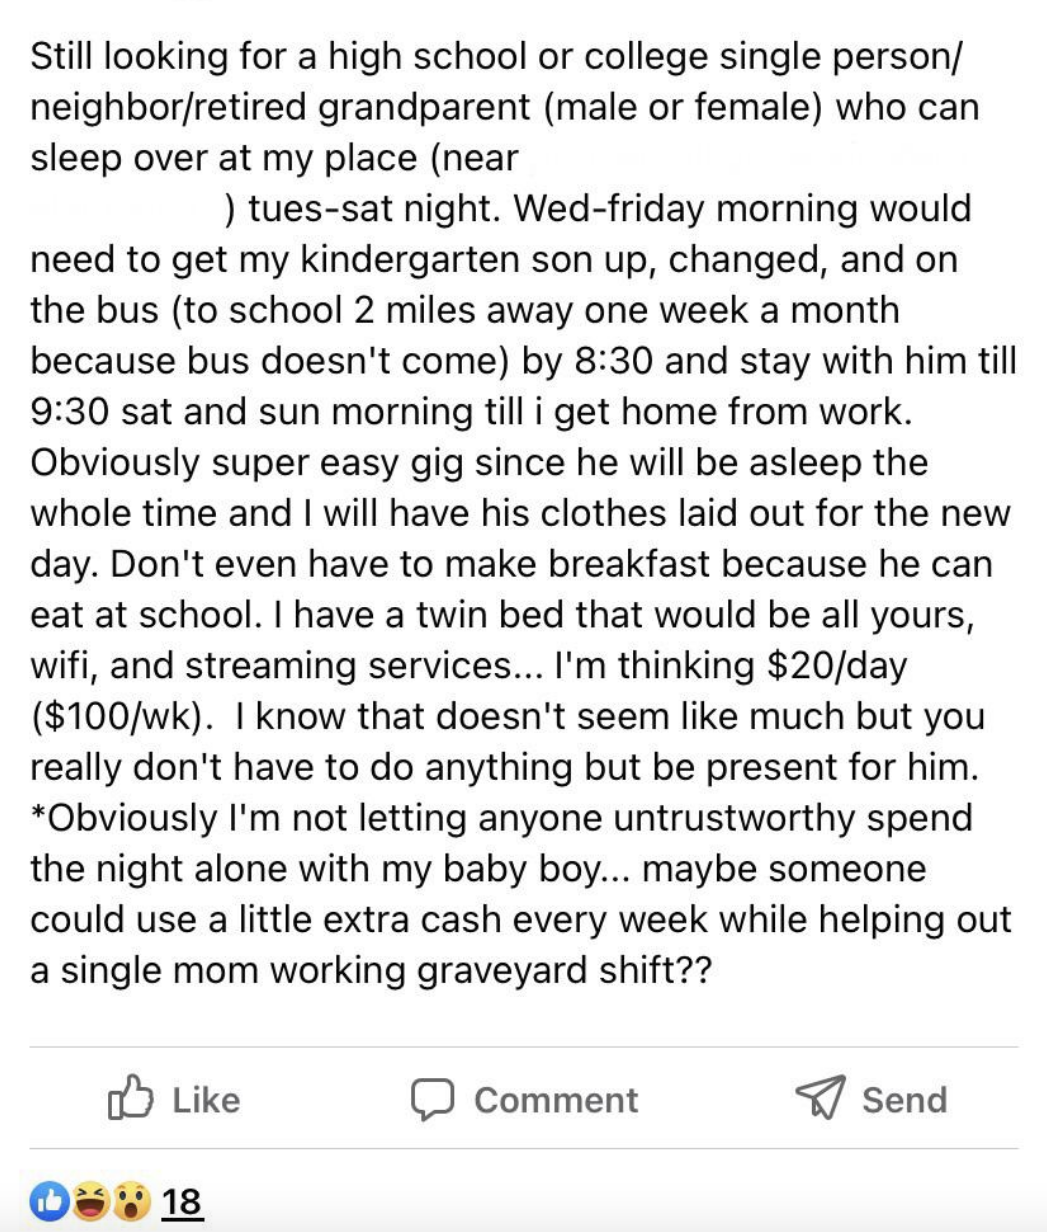 A mother asks for someone to babysit her child overnight, sleep at her house Tuesday through Saturday, and take her child to school in the morning — all for $20 a day